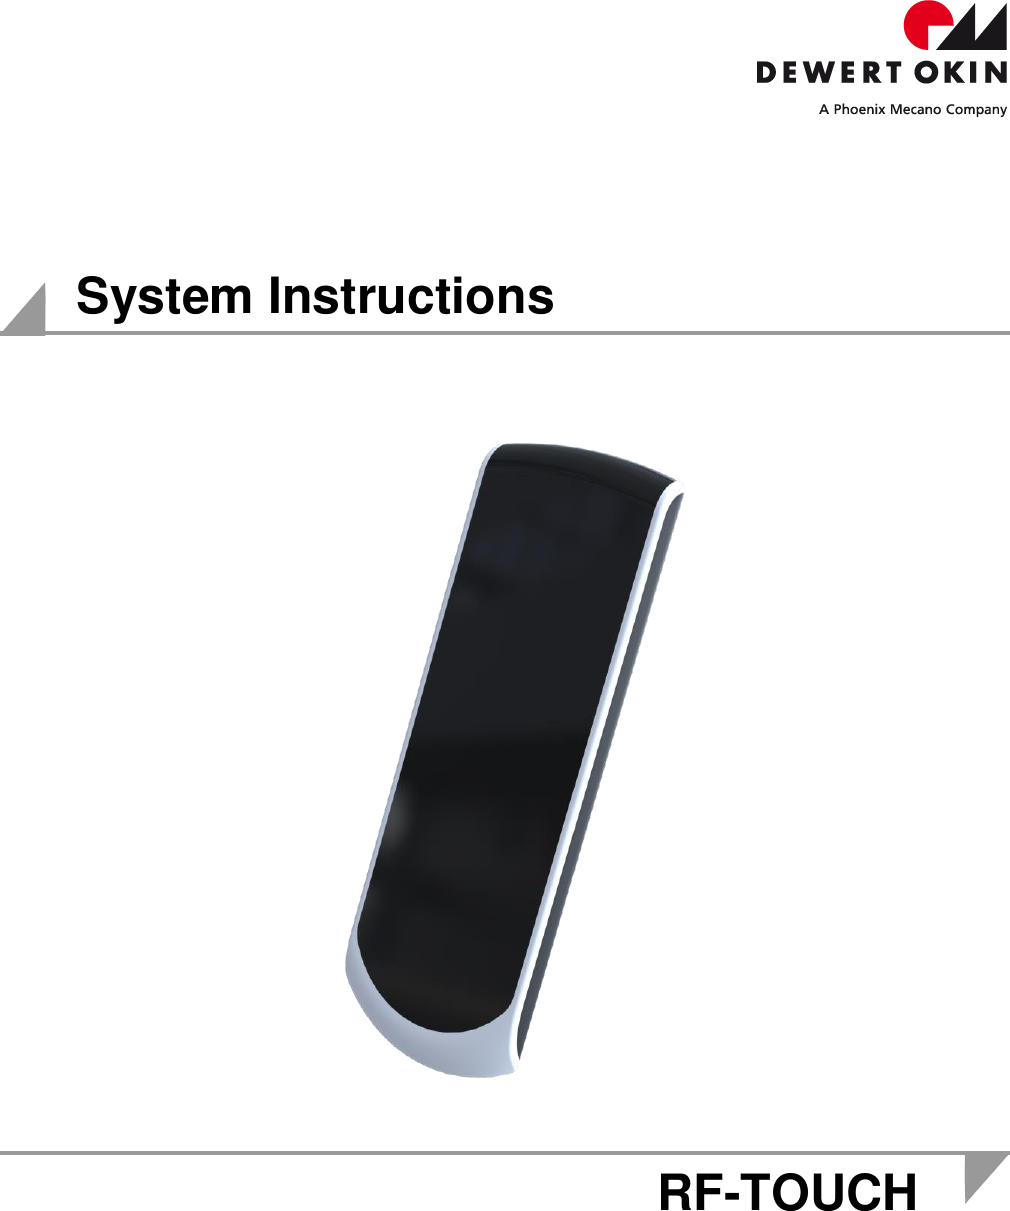        System Instructions          RF-TOUCH    